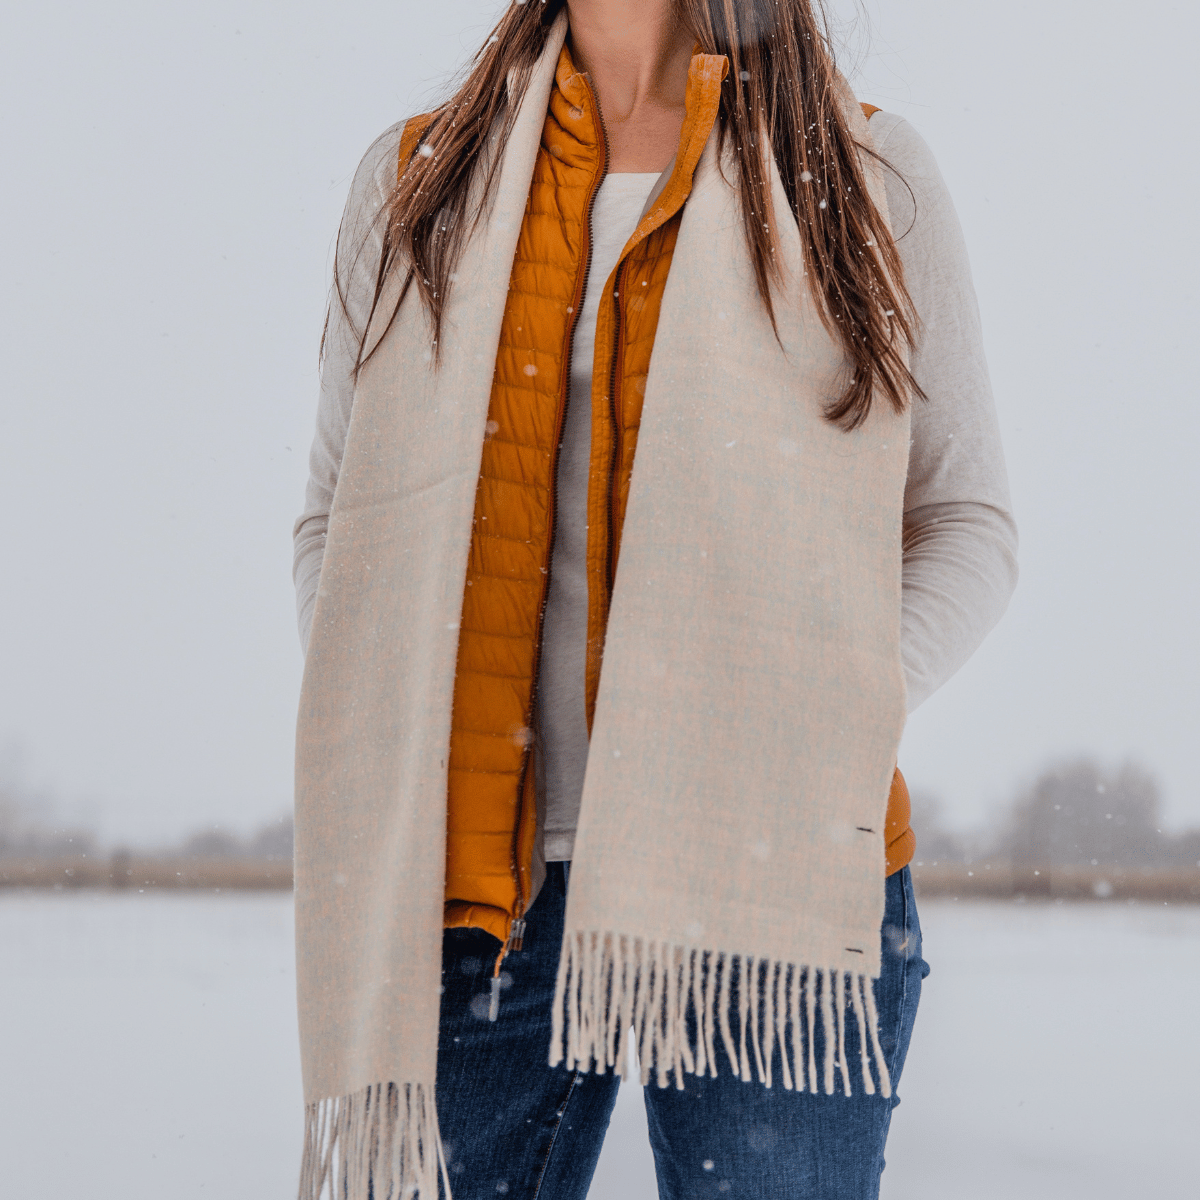 A close up photo of a woman standing in a snowy scene wearing blue jeans, a long sleeve white shirt, an orange vest, and an Alpacas of Montana soft stylish women&#39;s fashion comfortable cozy cute warm alpaca wool taupe color solid woven scarf with tassels.